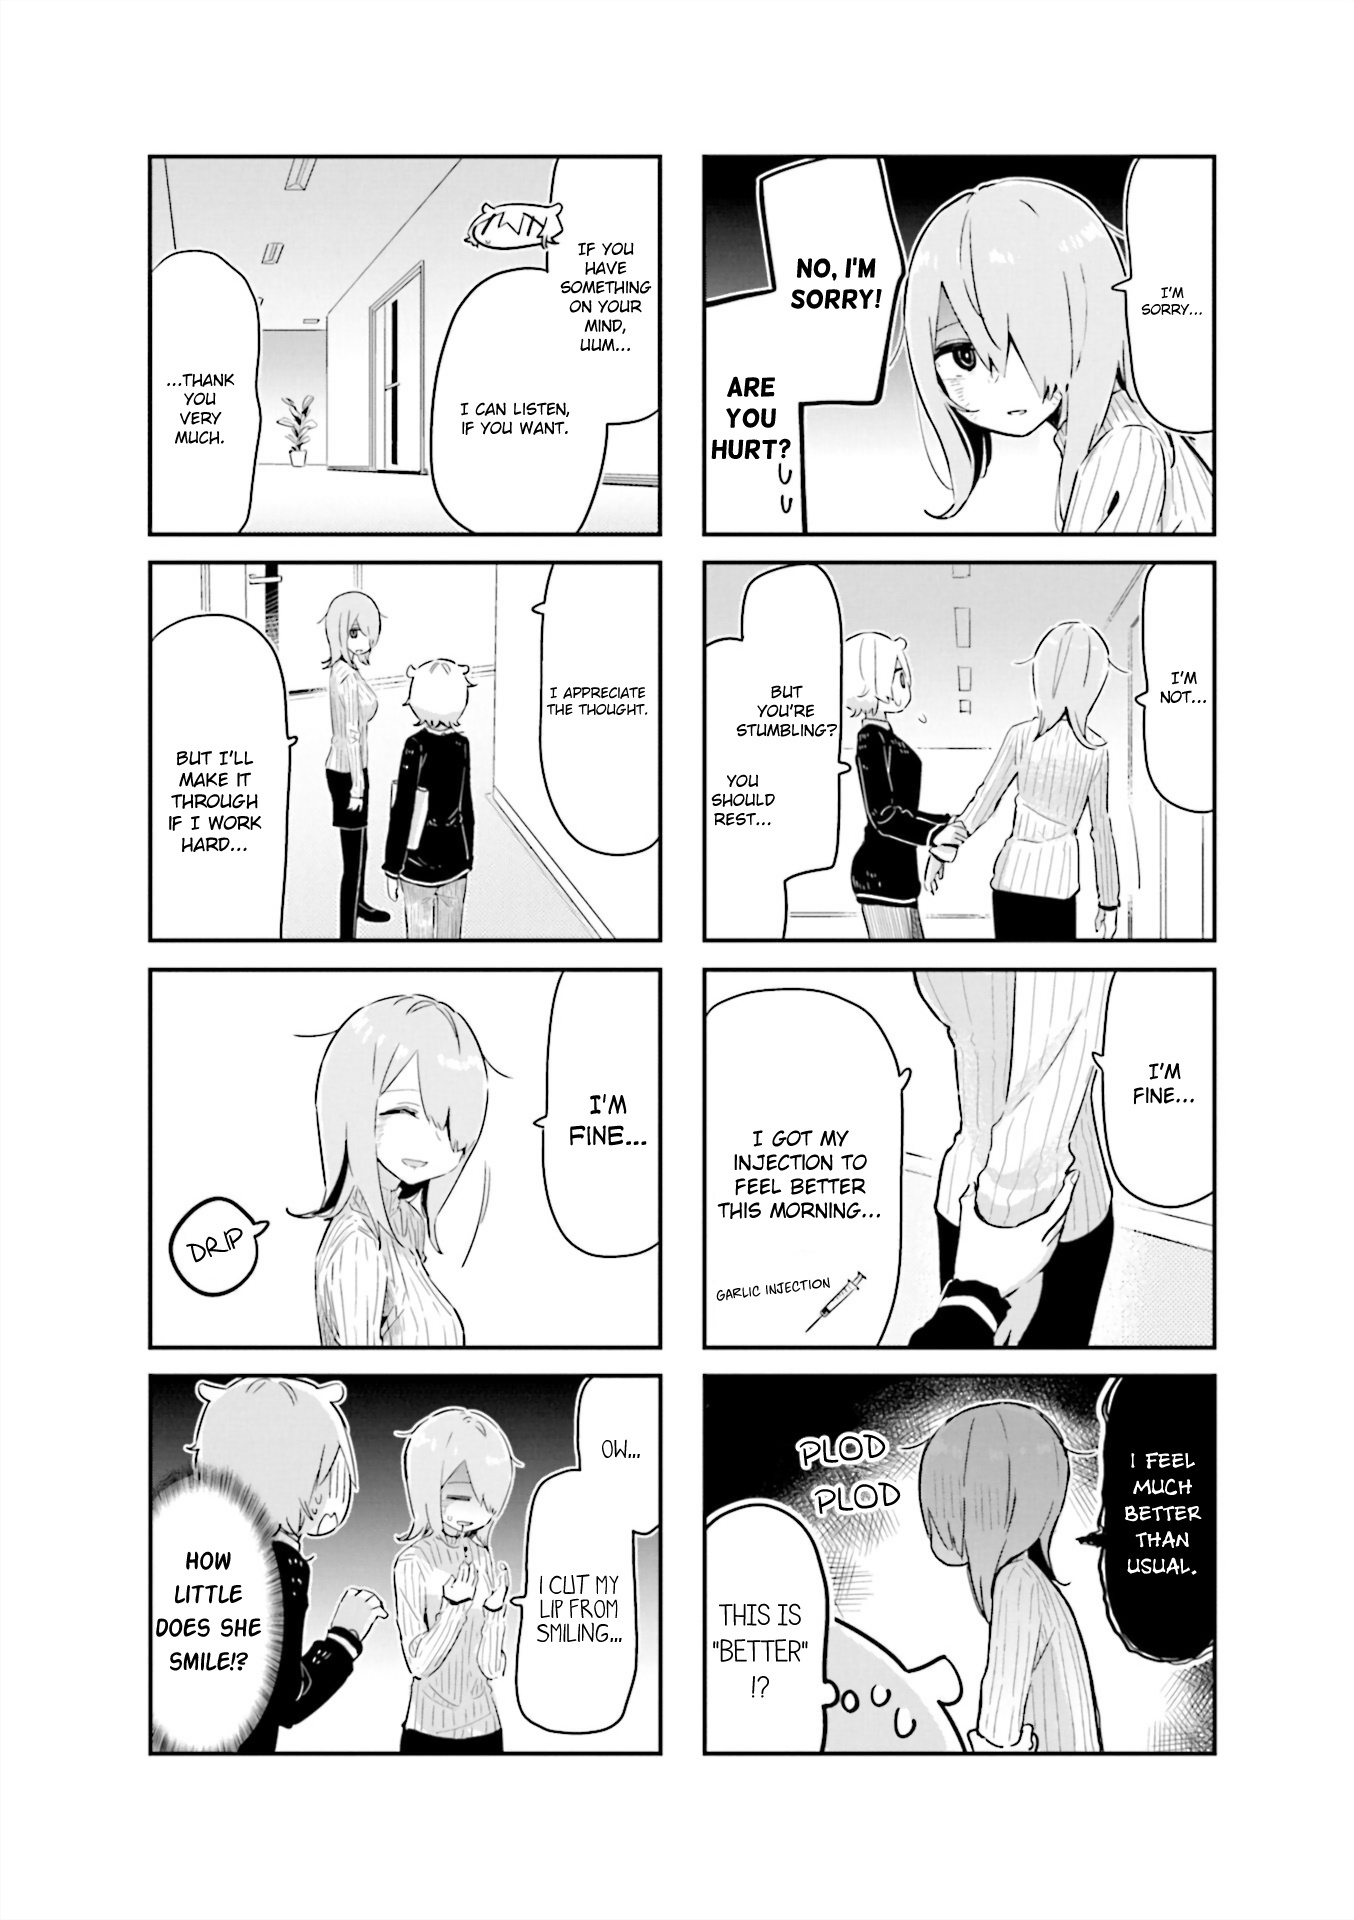 Hogushite, Yui-San Vol.1 Chapter 9: Even Adults Want To Be Pampered - Picture 2